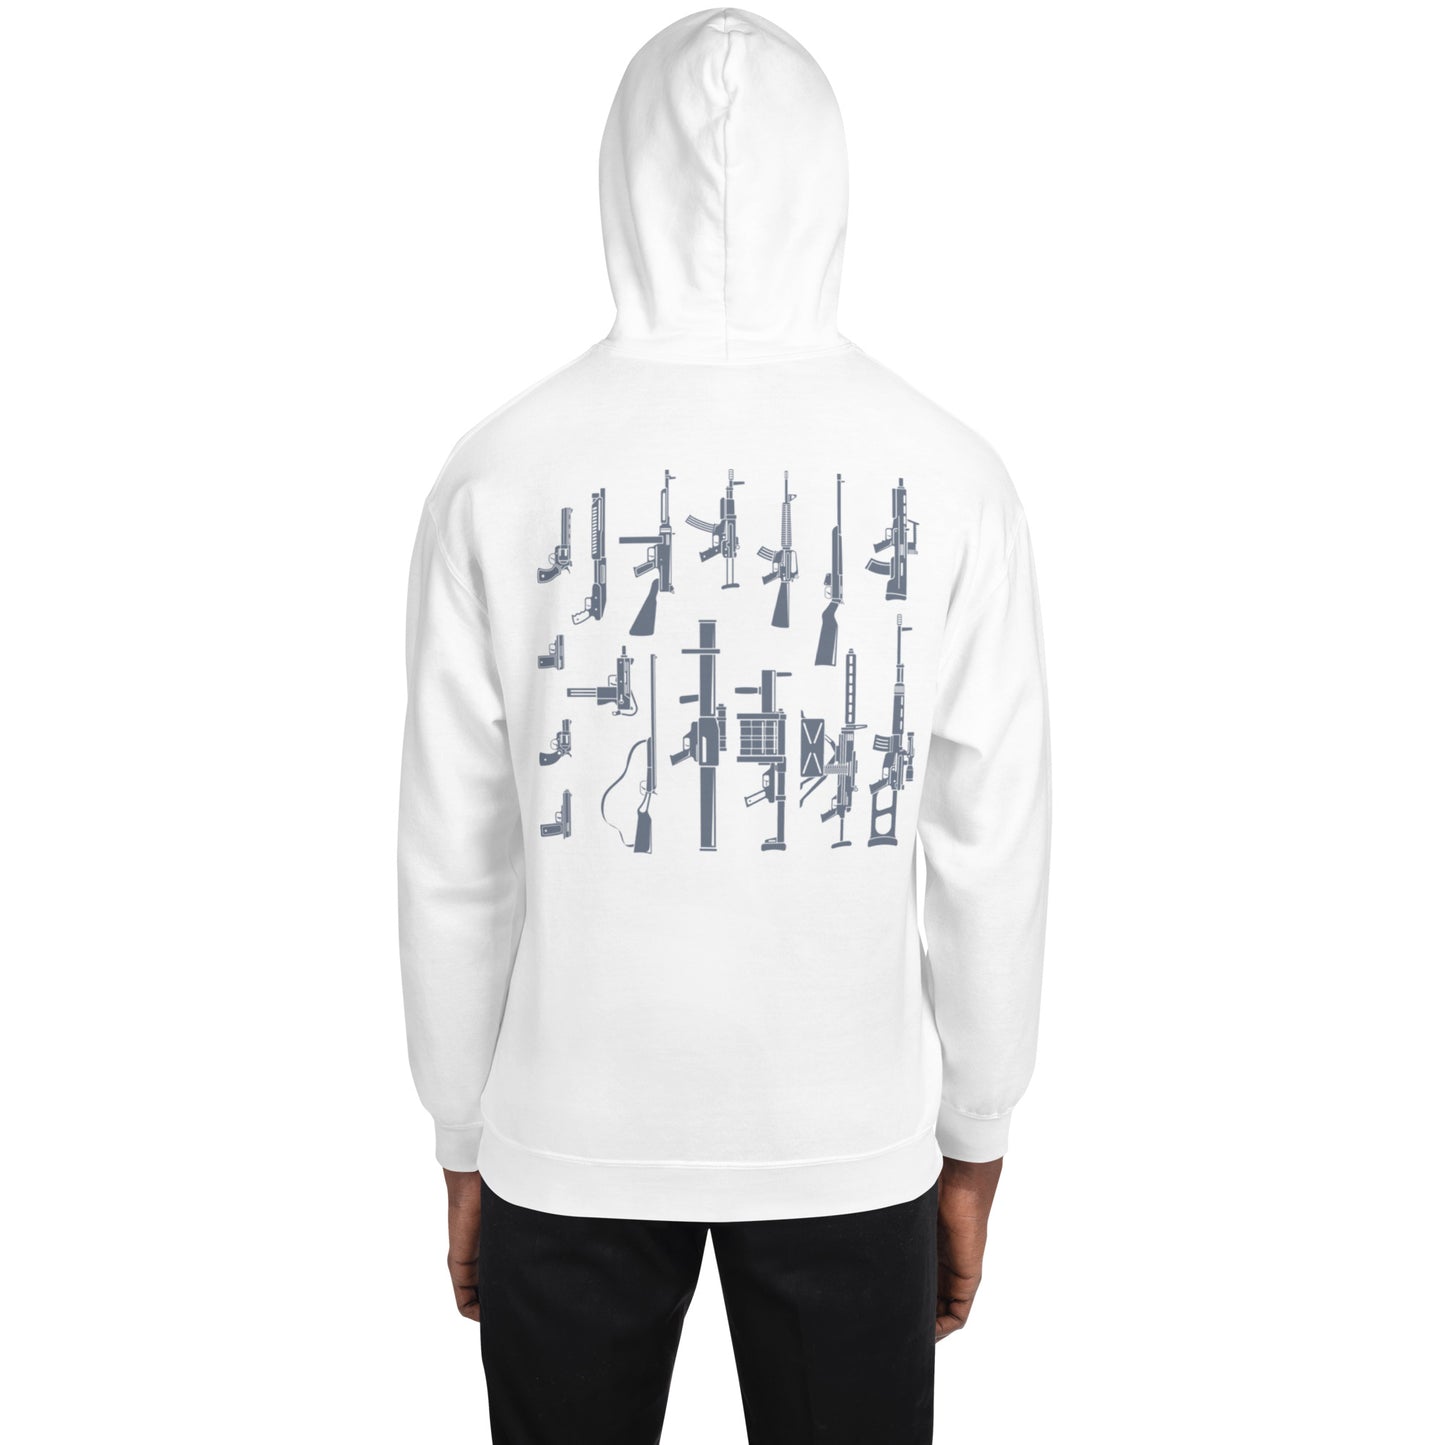 The Collector Unisex Hoodie